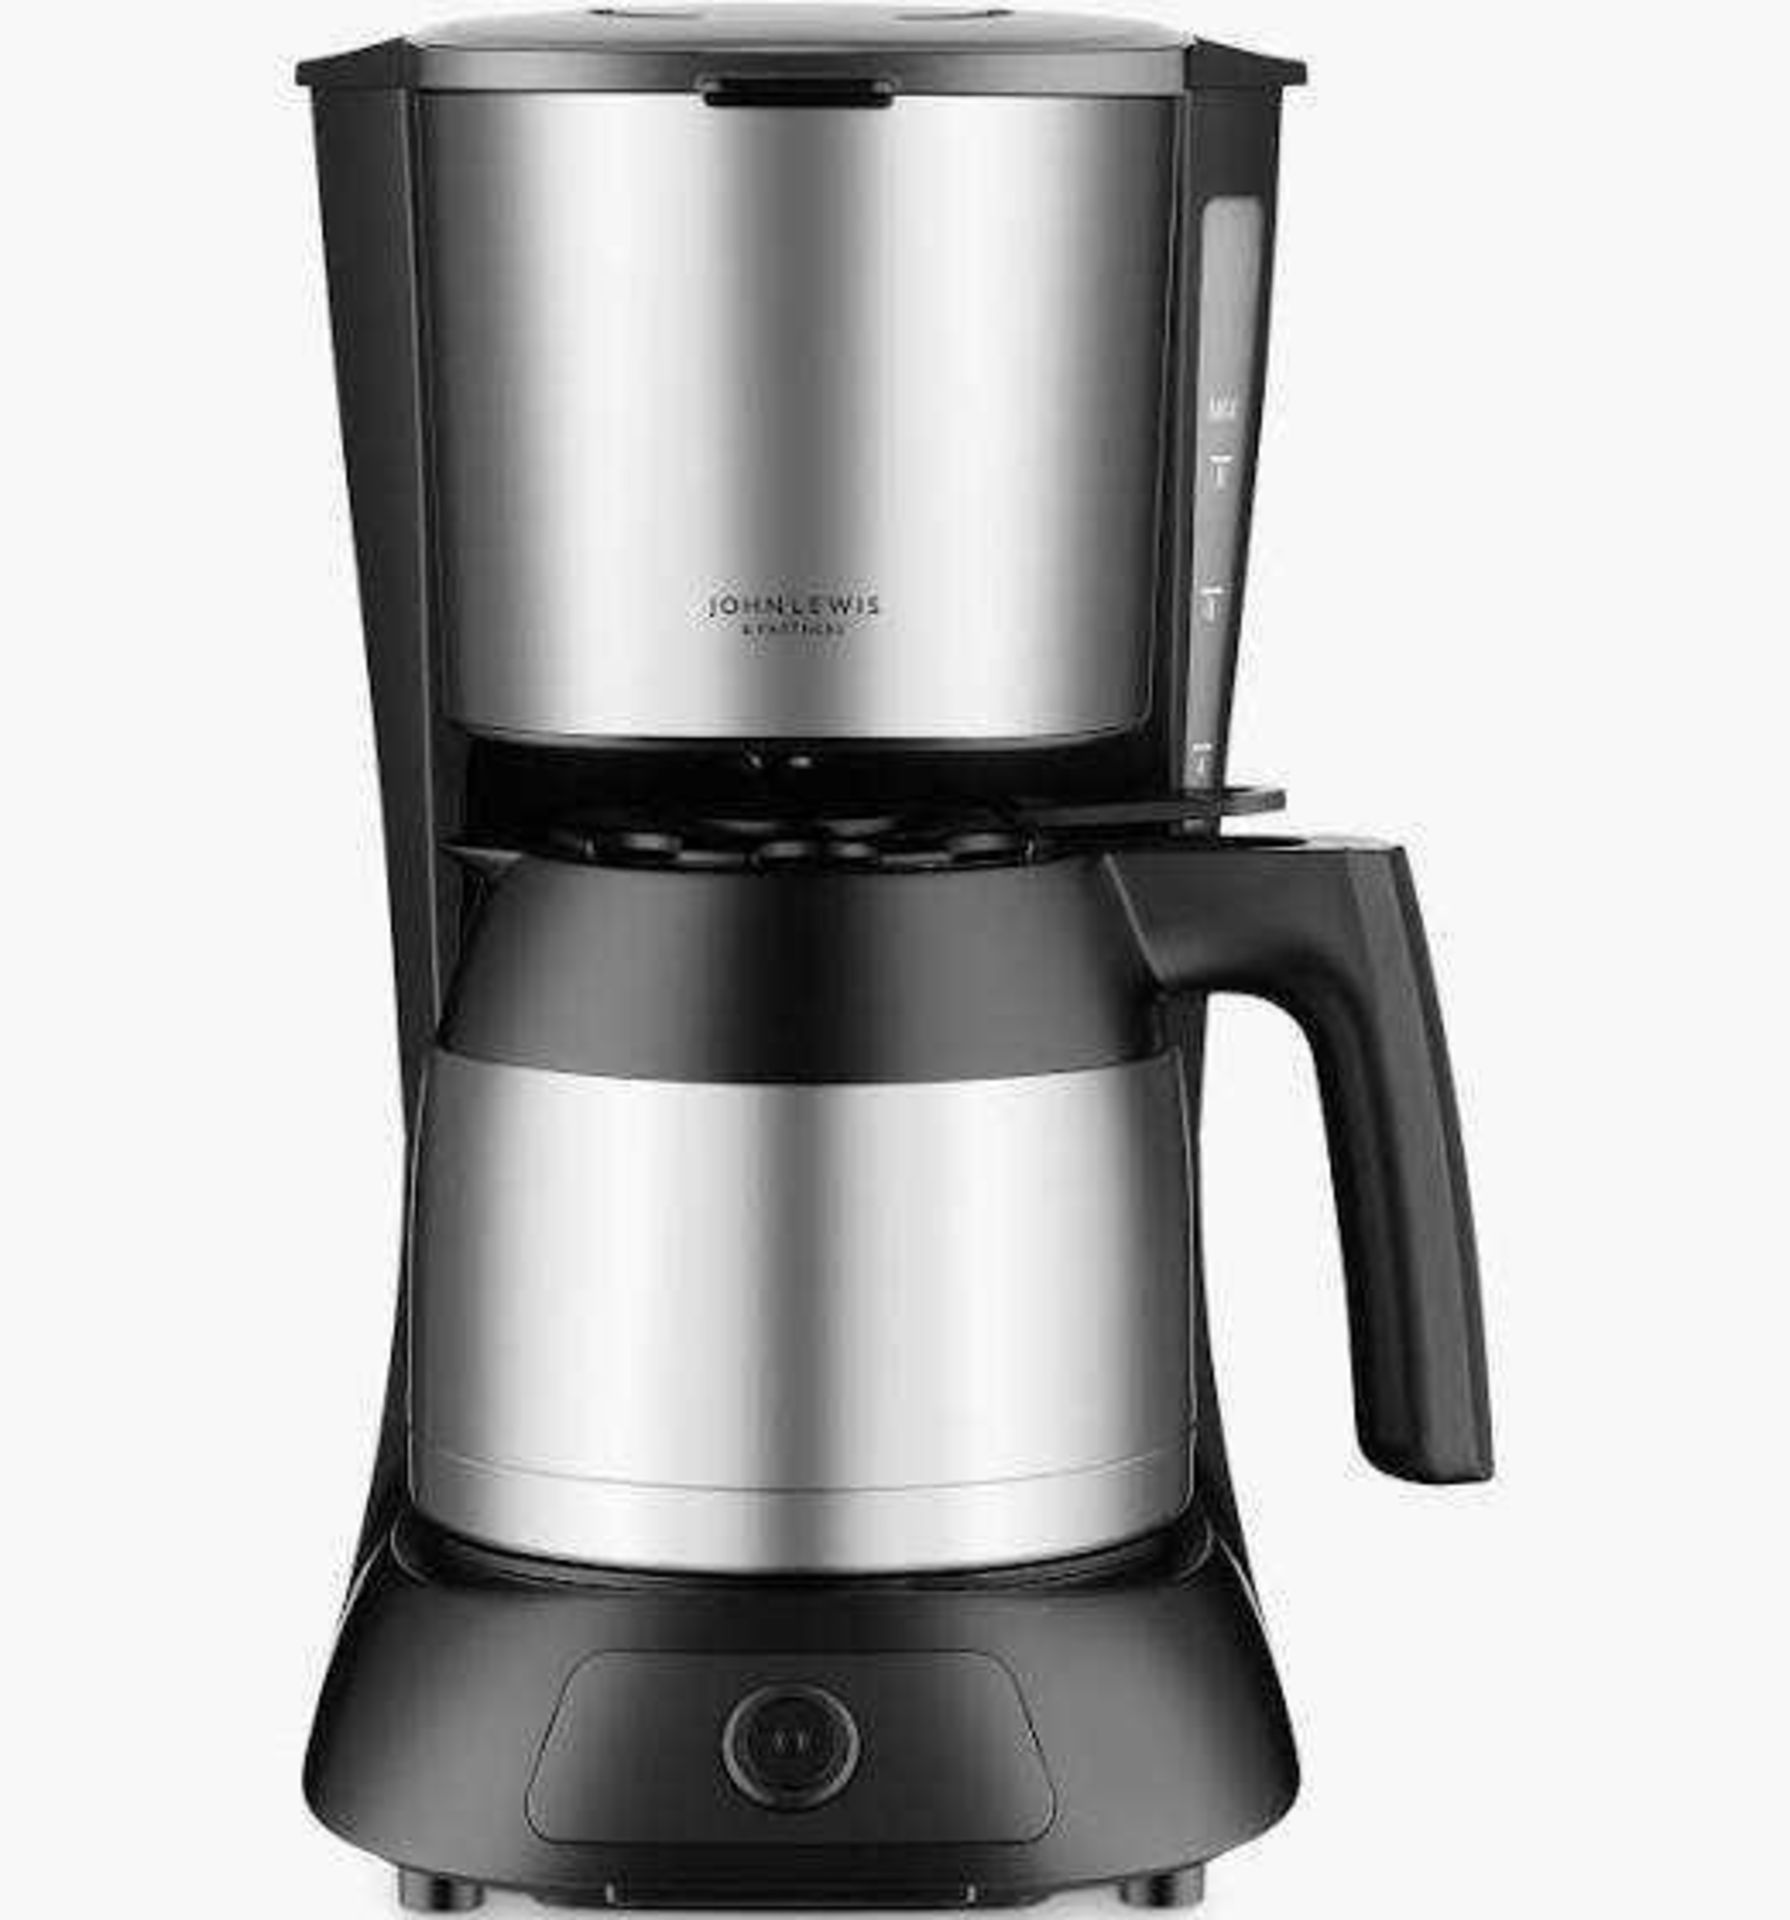 Rrp £30 Boxed John Lewis Filter Stainless Steel Coffee Machine - Image 2 of 2